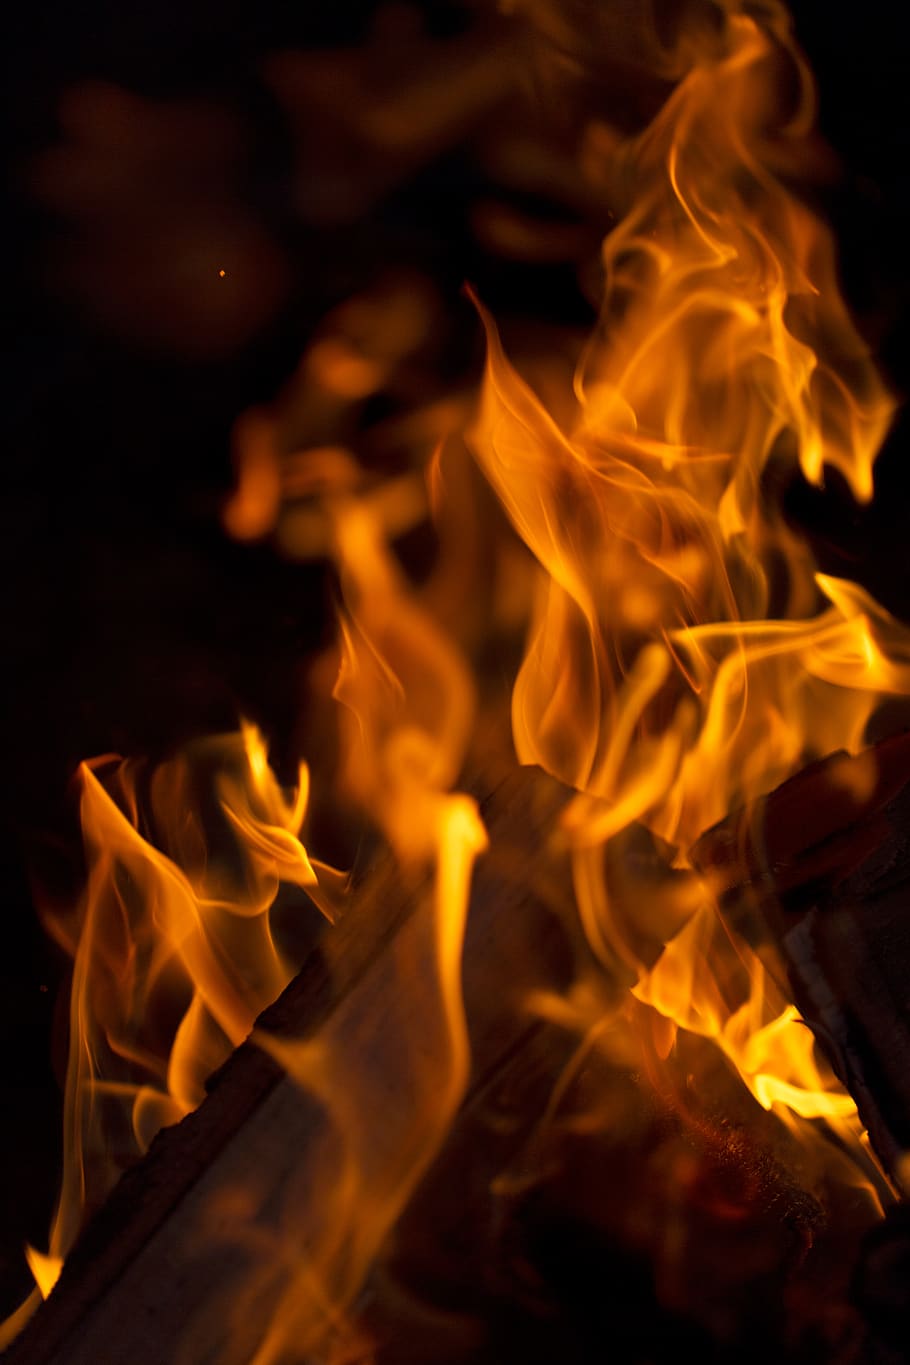 fire, wood, nature, hot, orange, yellow, night, outdoors, warmth, camping